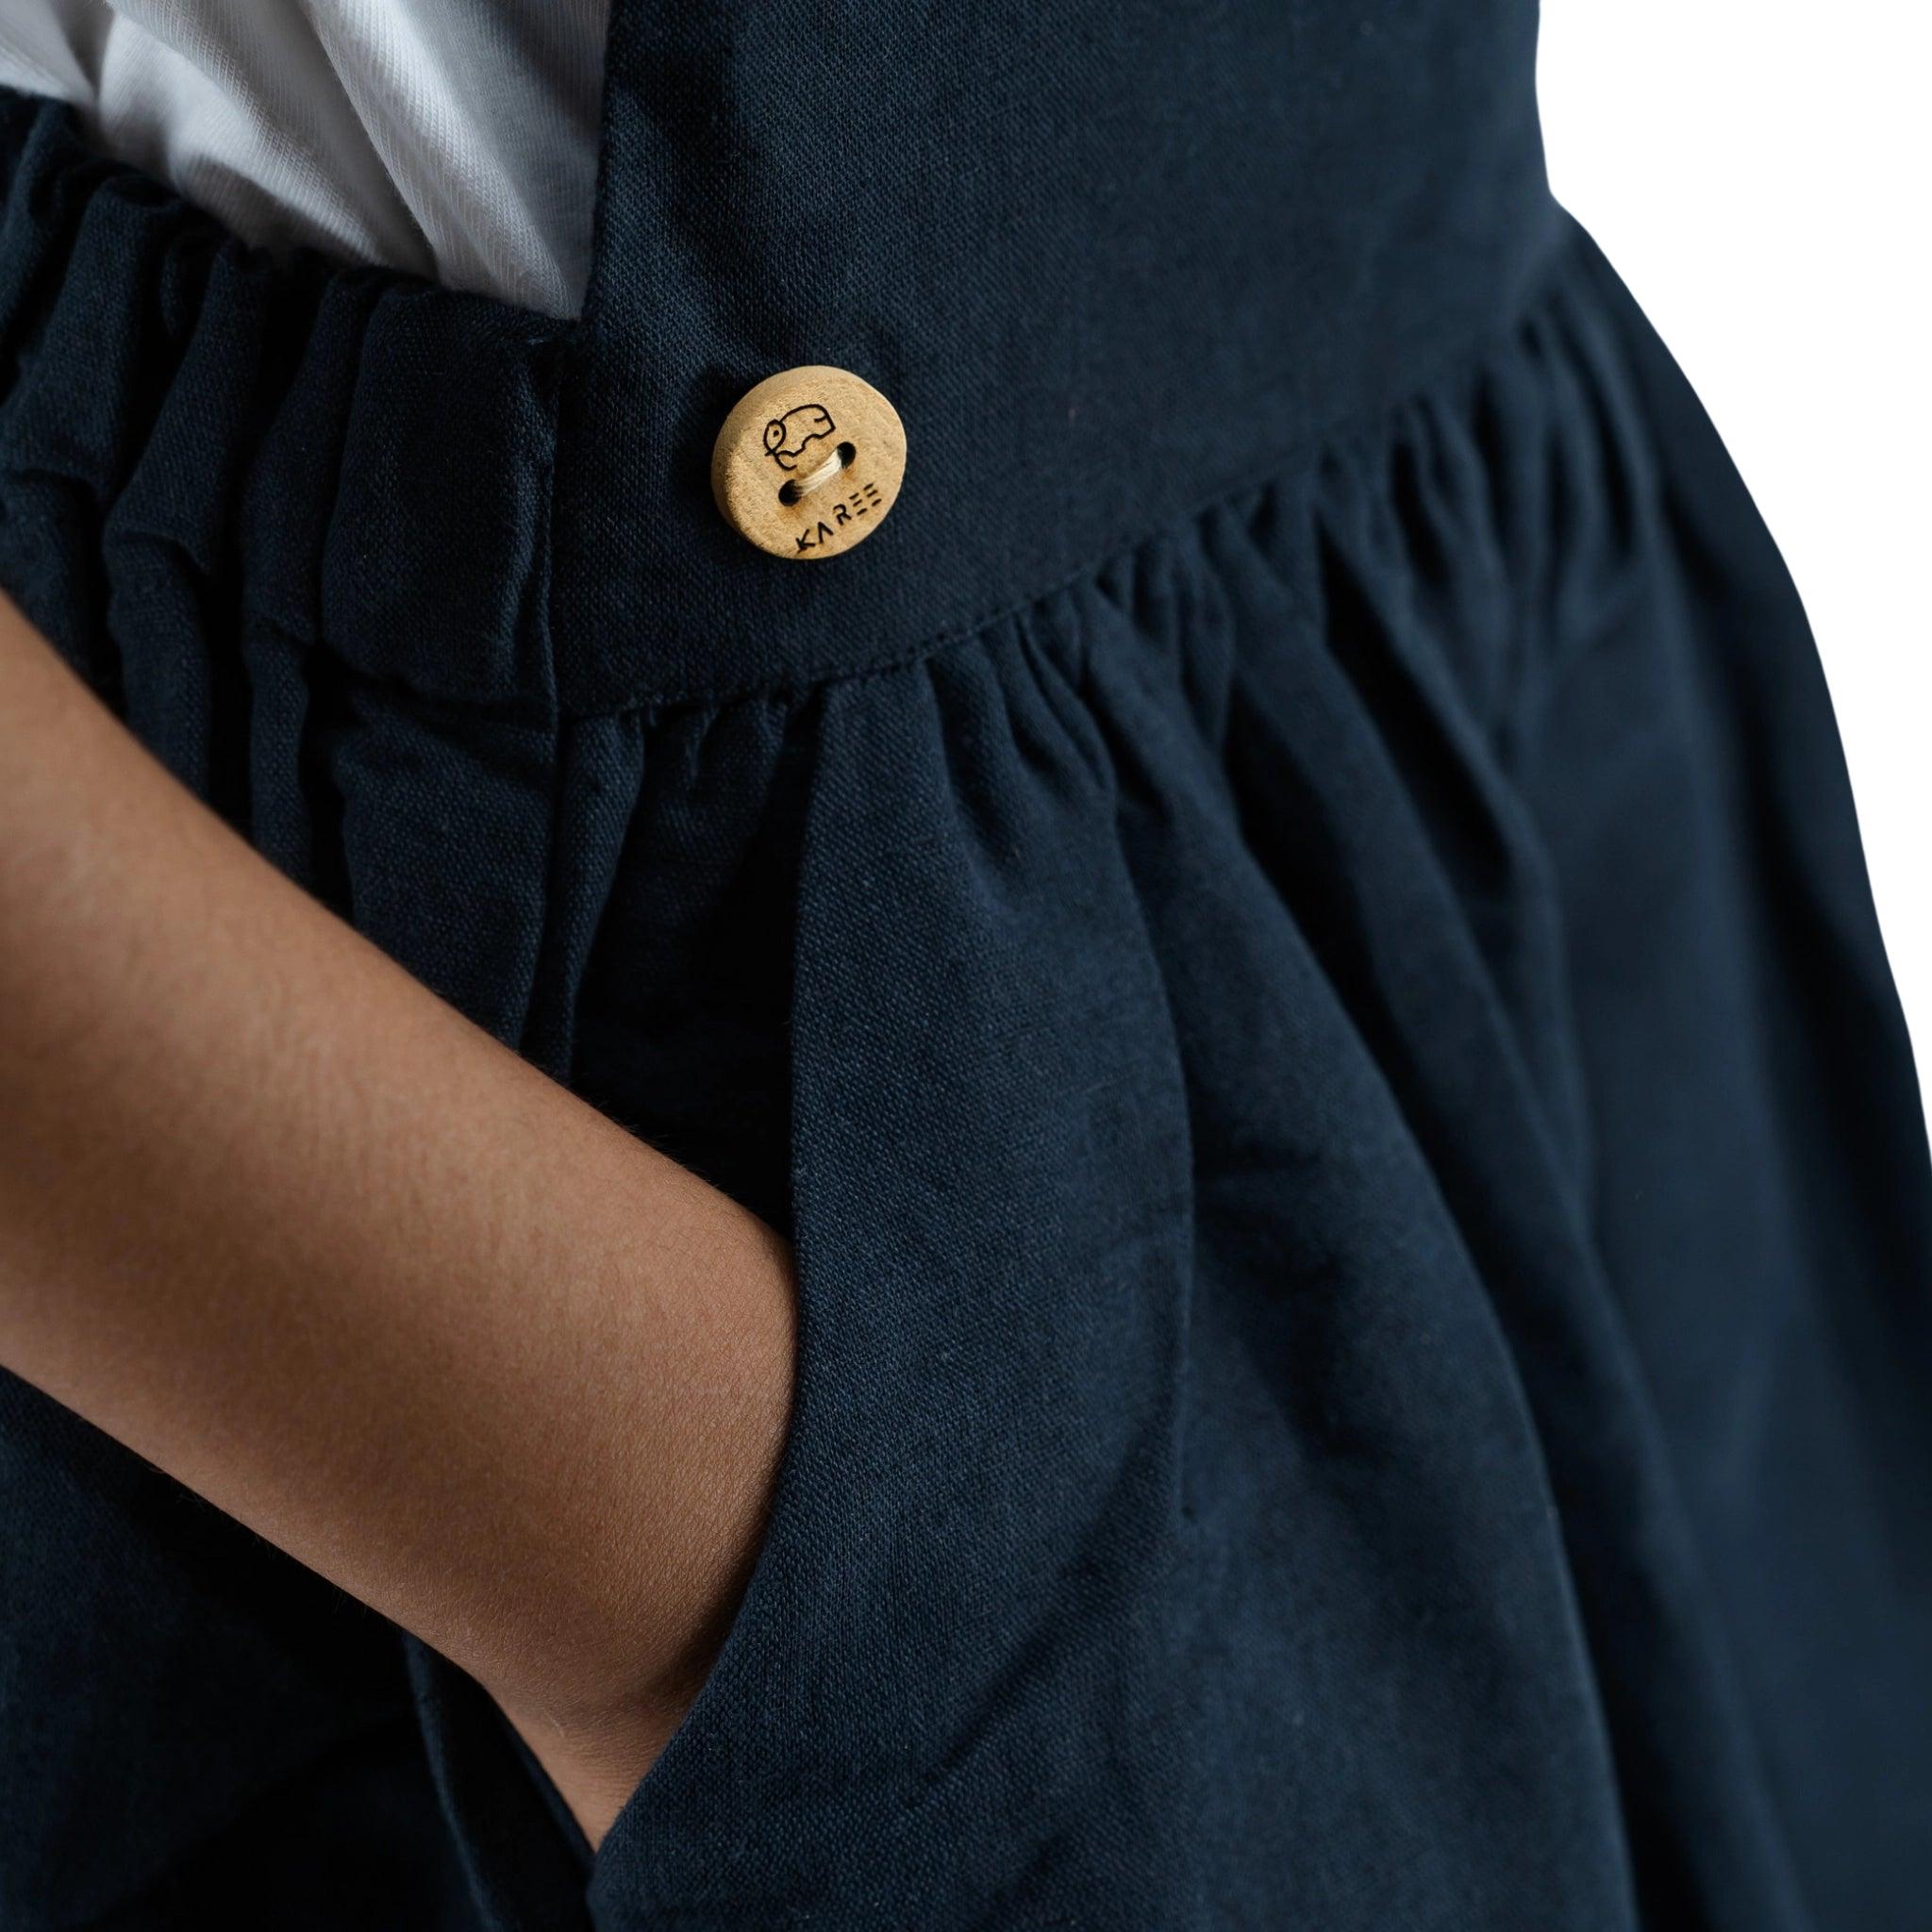 Close-up of a Karee ebony black linen pinafore for girls with a unique button featuring a smiley face design, focused on the waist area where the fabric gathers.